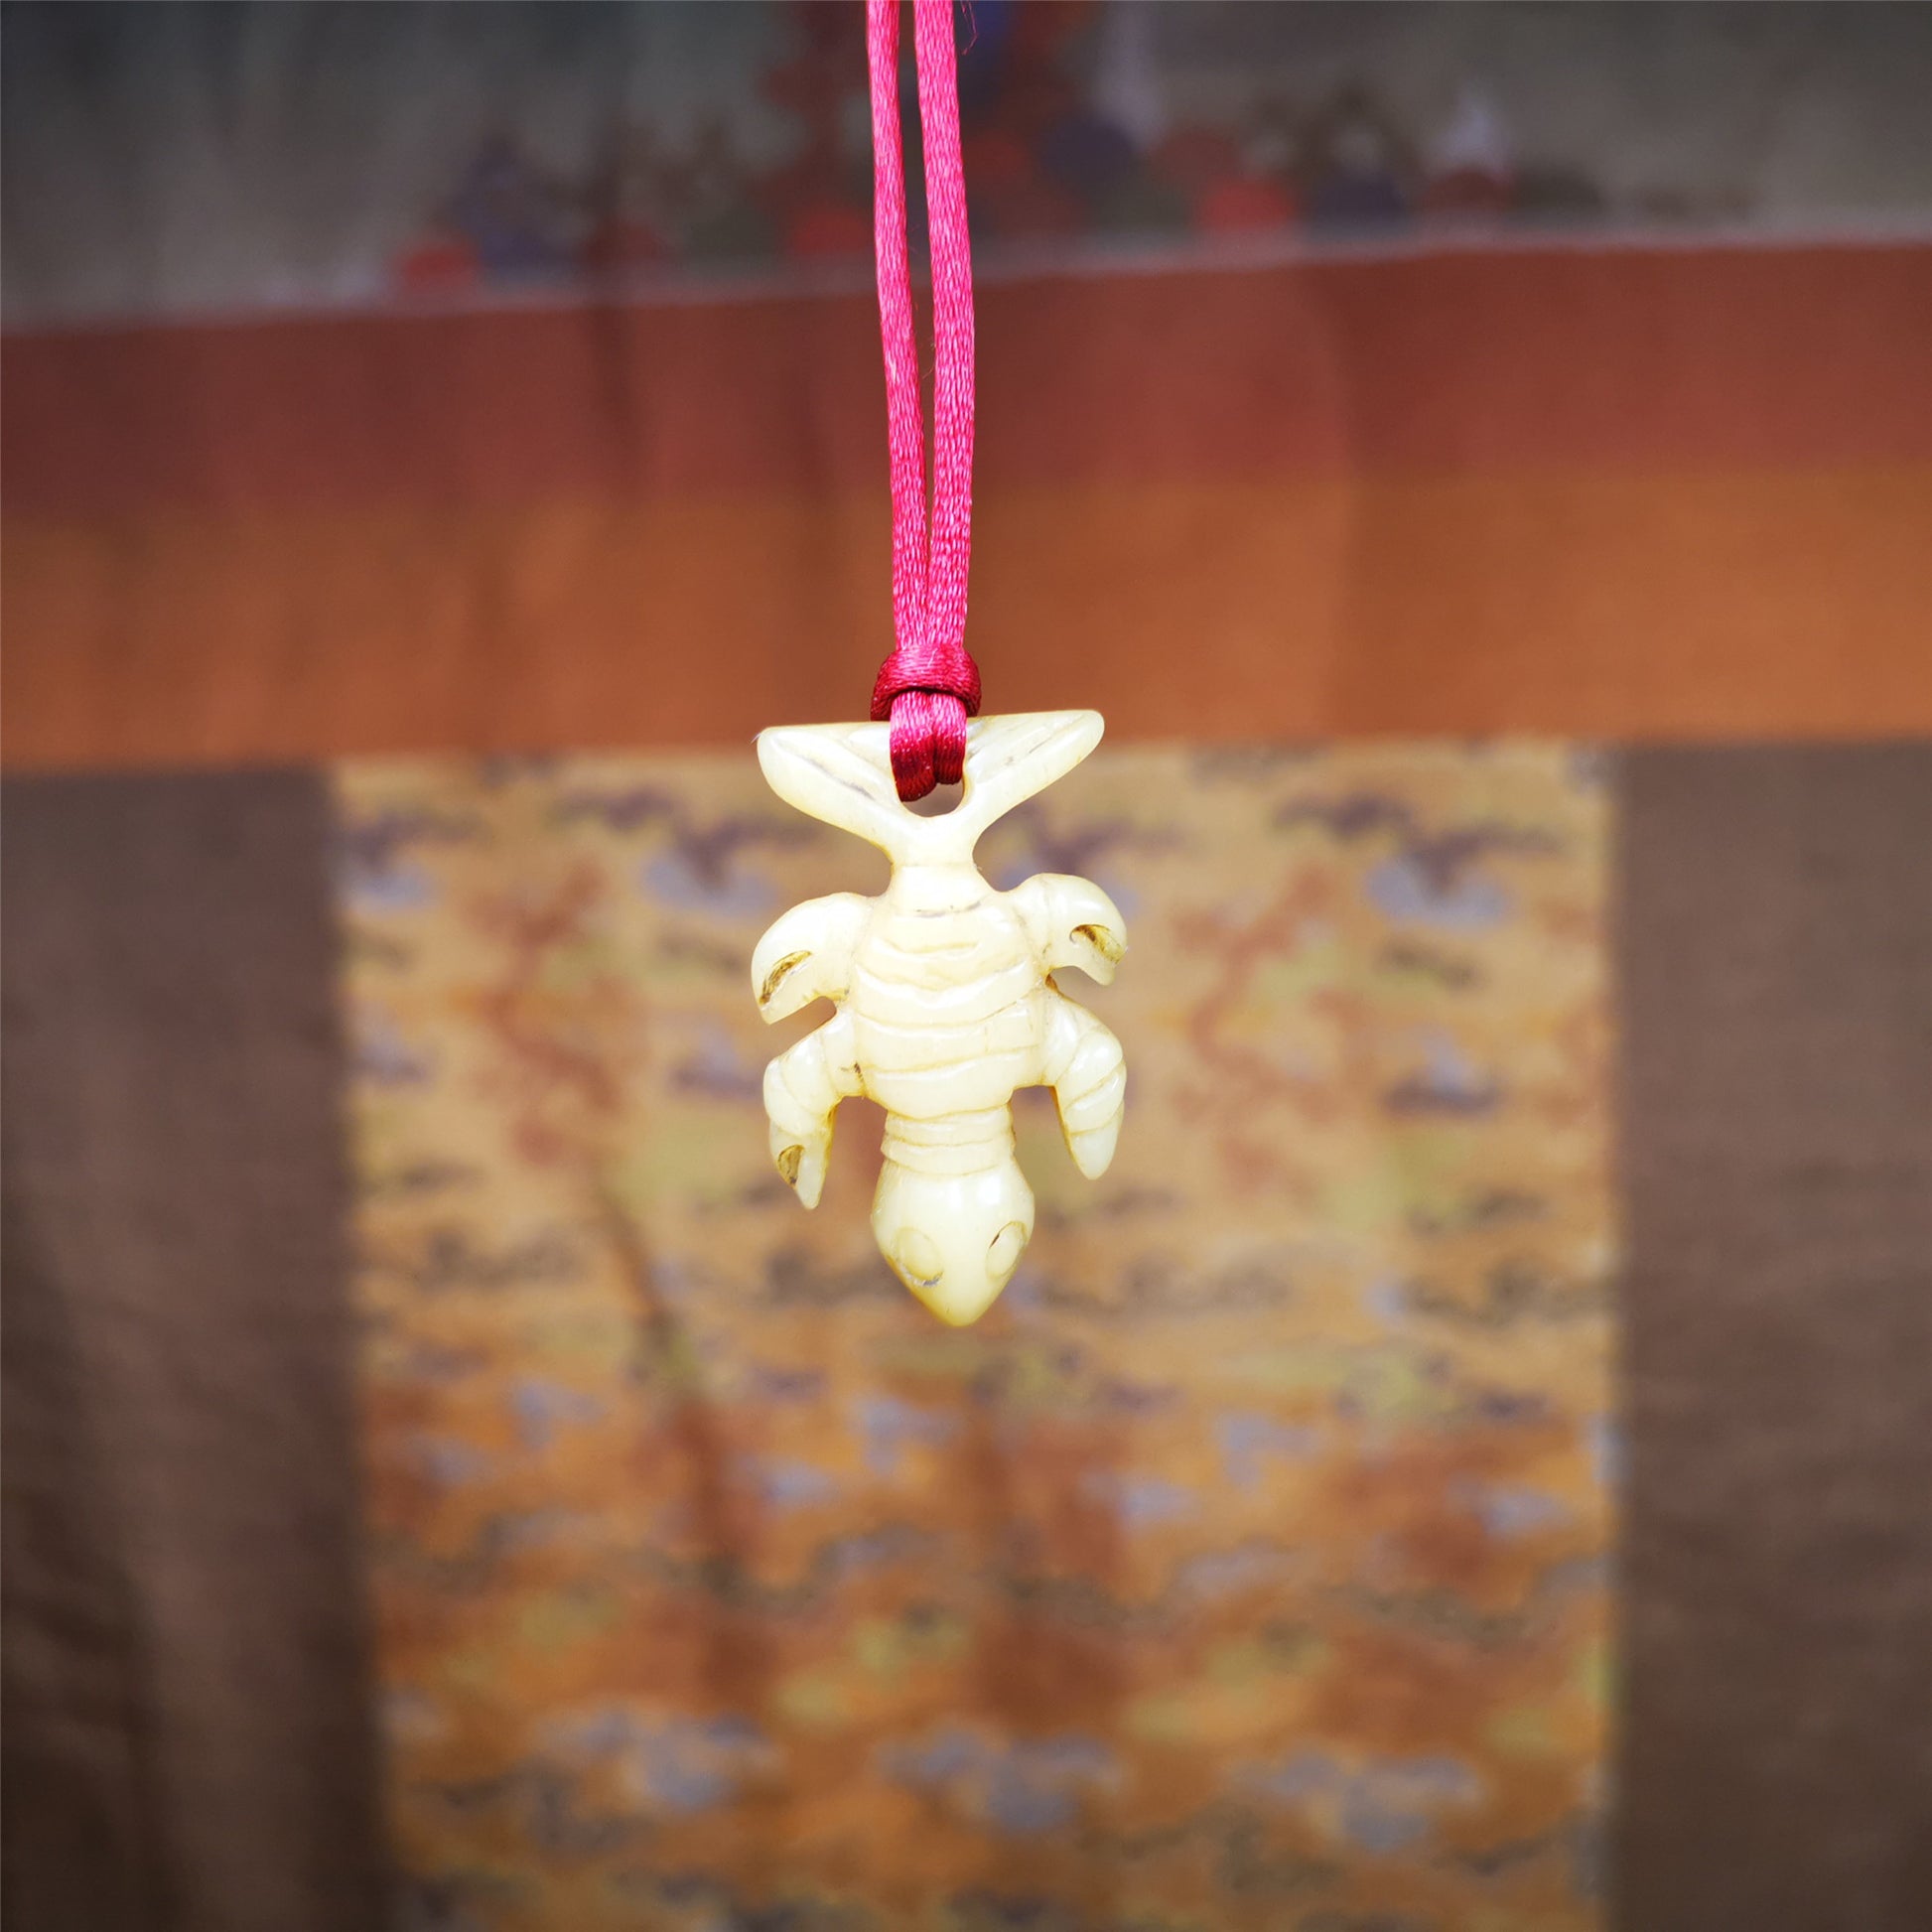 This unique bone carved Scorpion Guru pendant is made by Tibetan craftsmen in Hepo Township, Baiyu County, the birthplace of the Tibetan handicrafts. It's carved yak bone,yellow color,1.2 inch height. You can make it into necklace,or mala pendant.